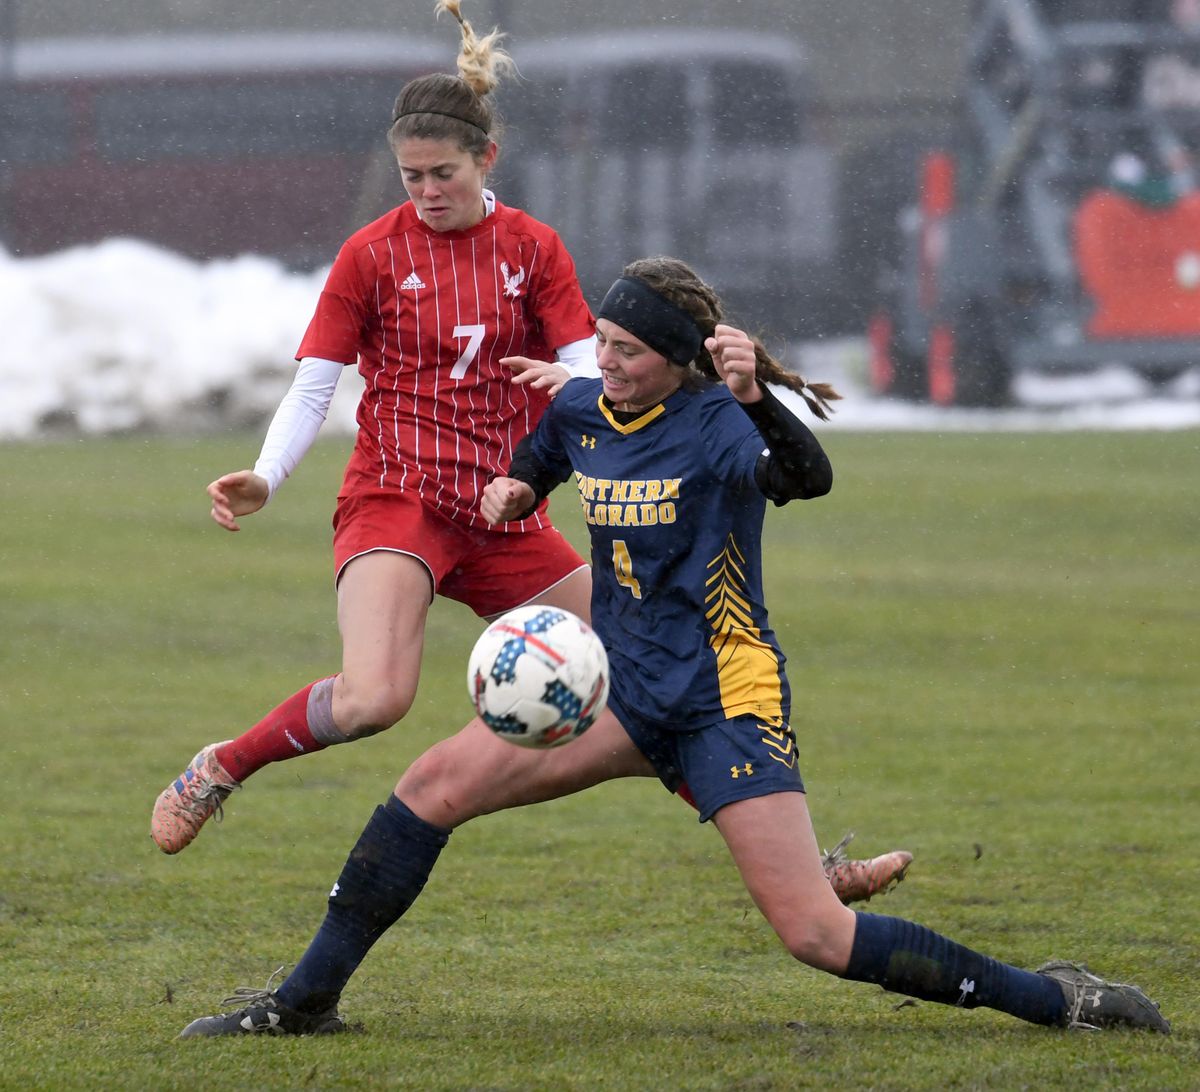 Eastern’s Delaney Romero (7) tangles with Northern Colorados Maddie Barkow (4) at midfield, Sunday, Nov. 5, 2107, at Eastern Washington University. It was the Big Sky title game, which the Eagles won 3-0 over the Bears. (Jesse Tinsley / The Spokesman-Review)